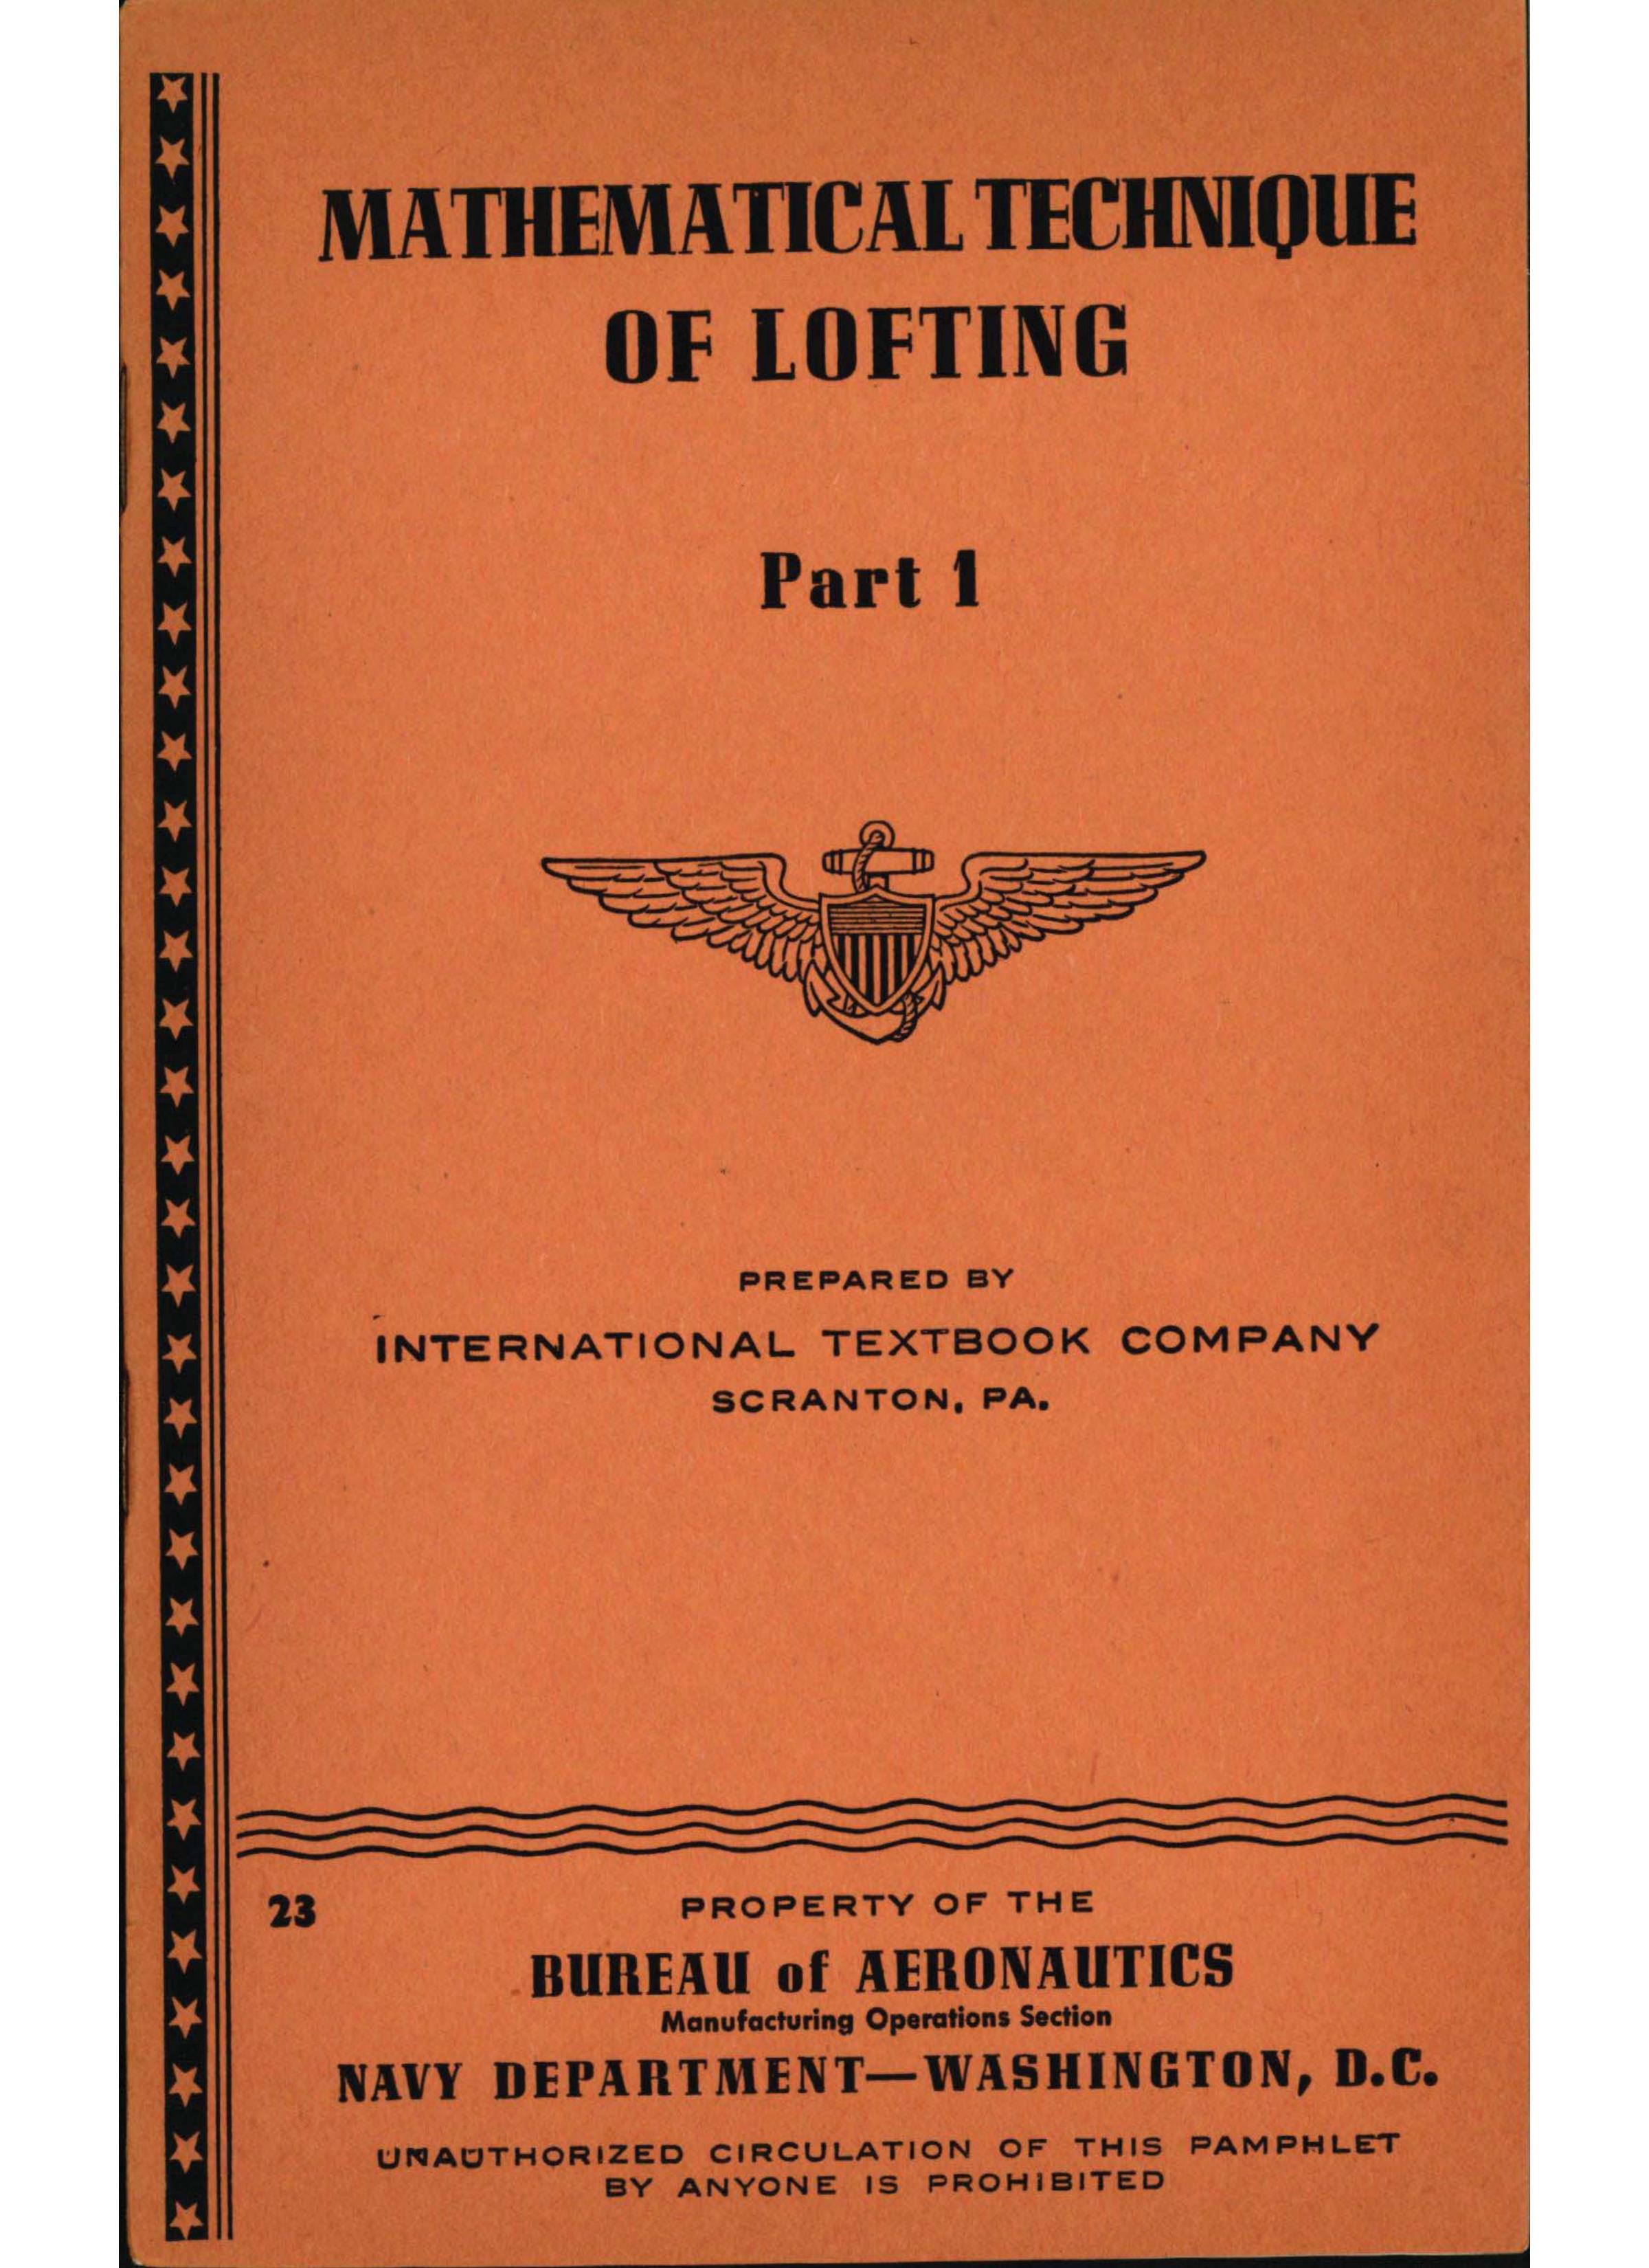 Sample page 1 from AirCorps Library document: Mathmatical Technique of Lofting - Part 1 - Bureau of Aeronautics